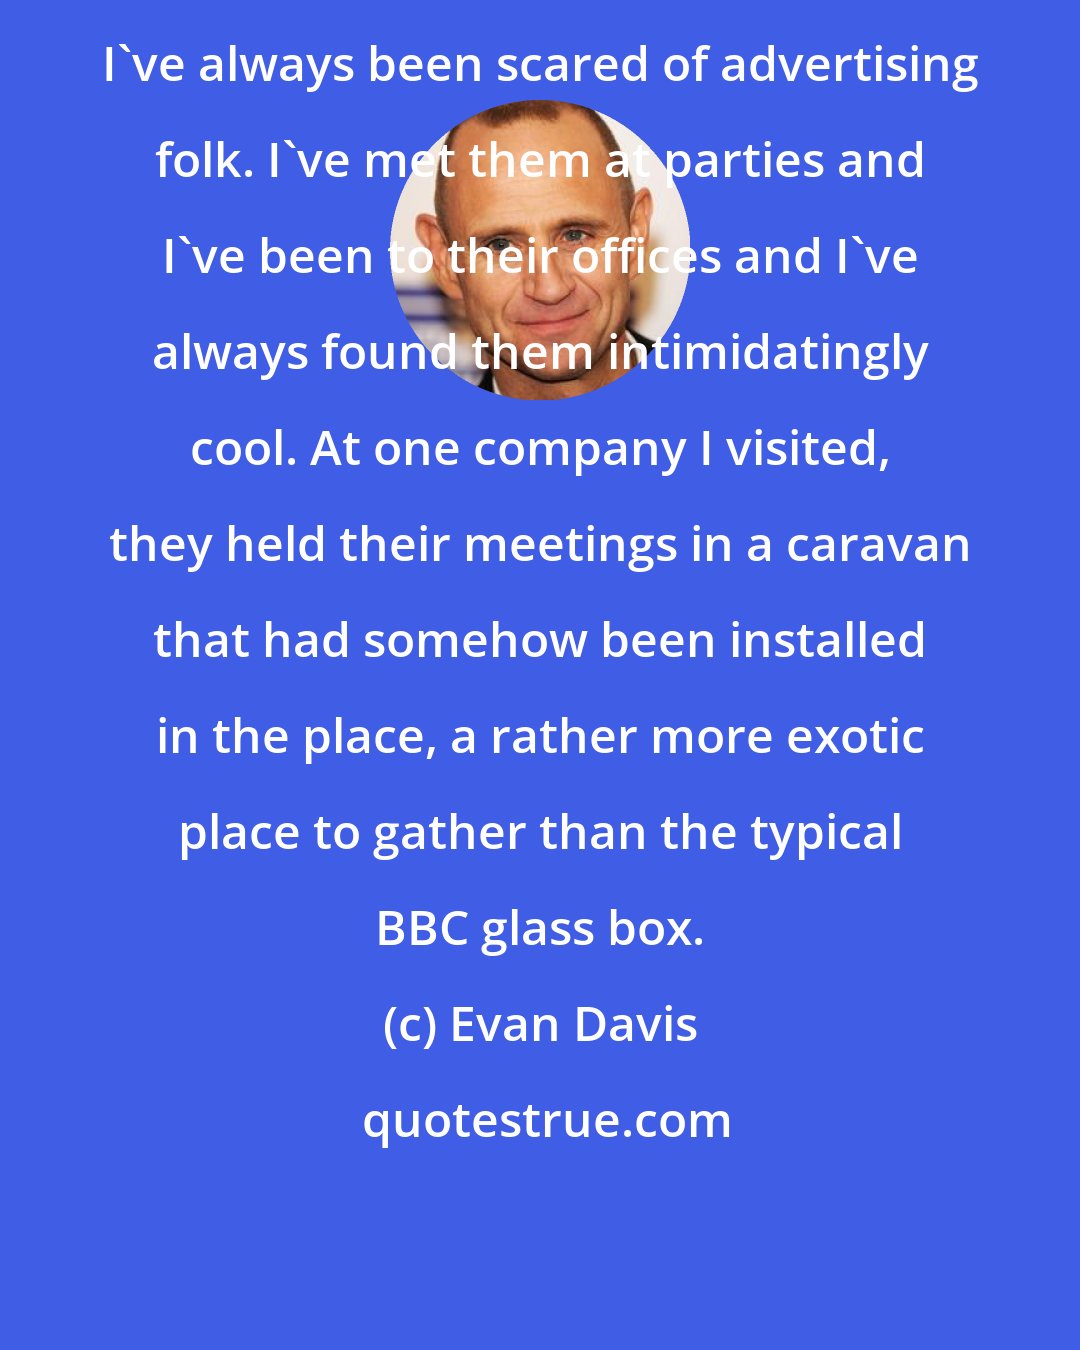 Evan Davis: I've always been scared of advertising folk. I've met them at parties and I've been to their offices and I've always found them intimidatingly cool. At one company I visited, they held their meetings in a caravan that had somehow been installed in the place, a rather more exotic place to gather than the typical BBC glass box.